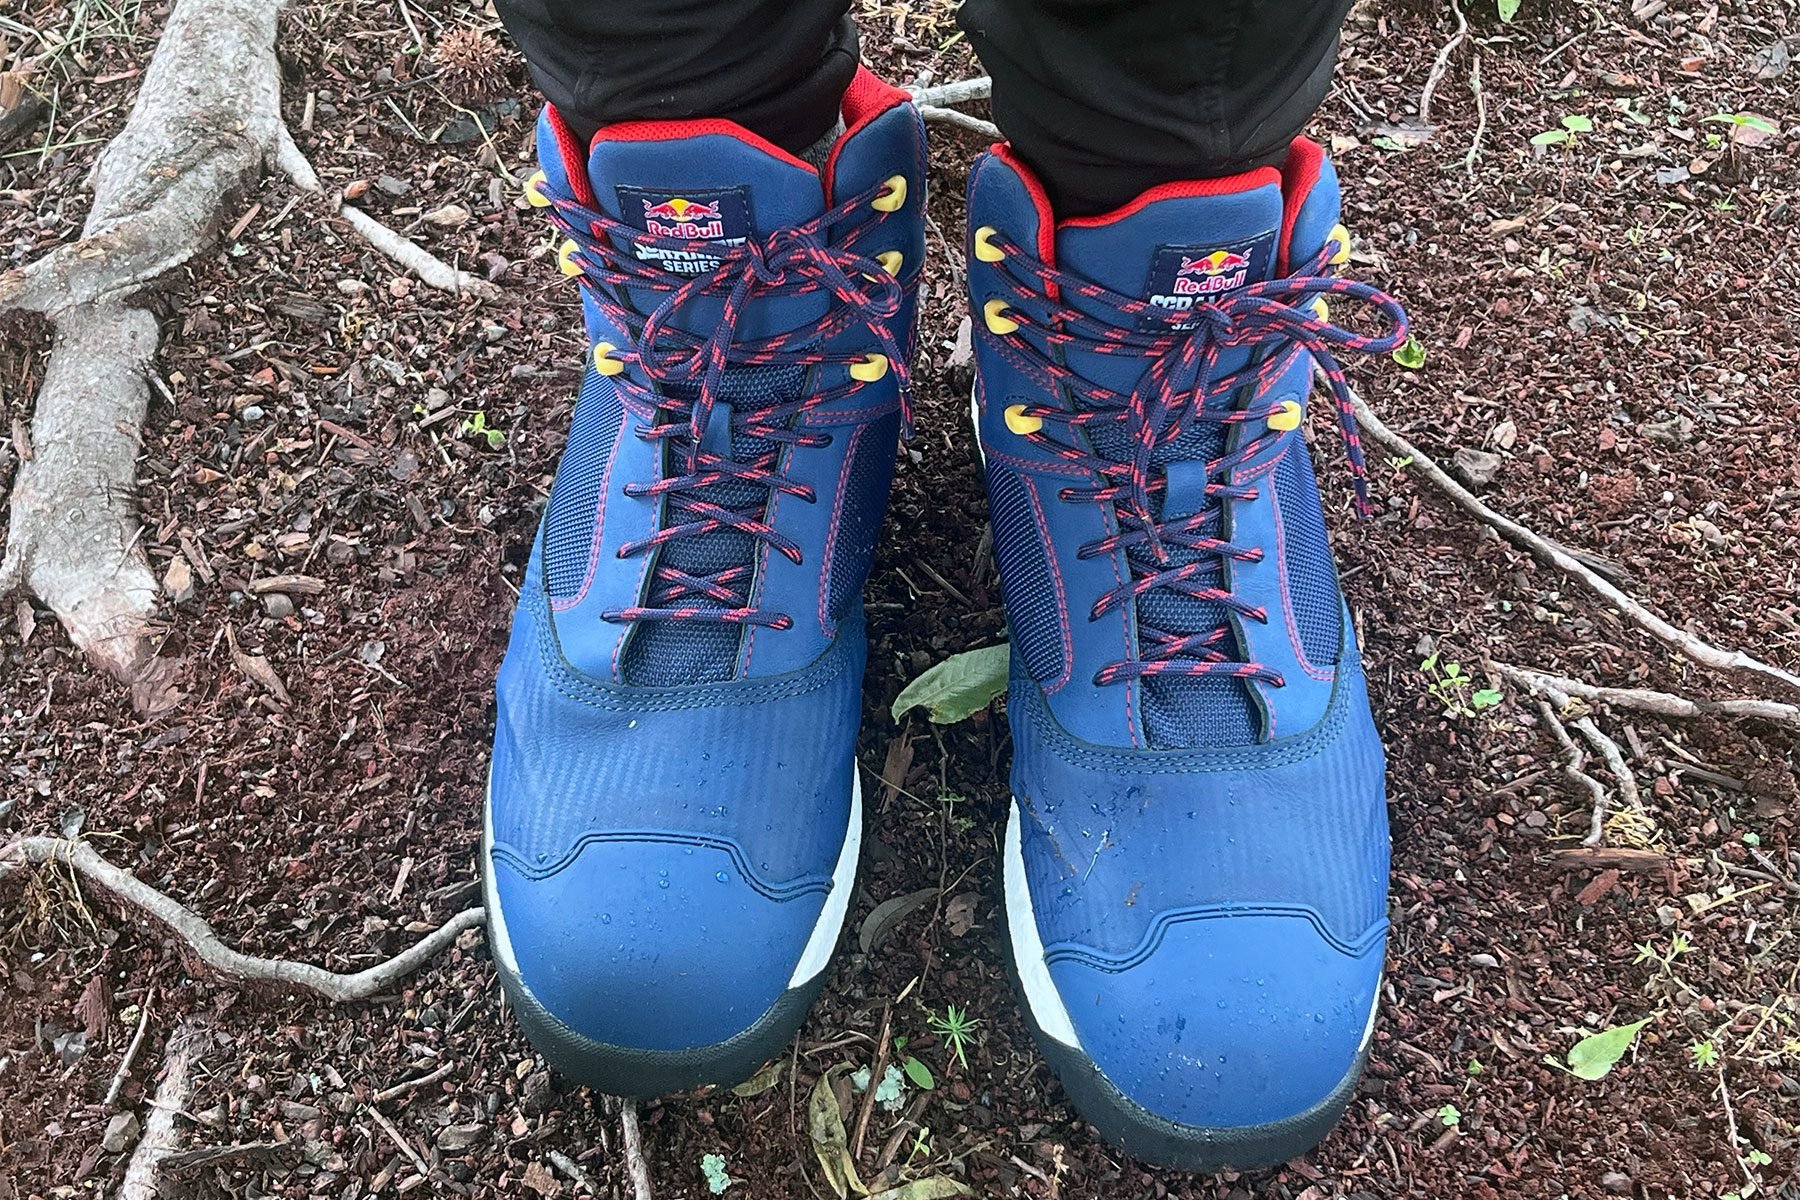 Wolverine Hiking Boots Get A Red Bull Themed Makeover on rough ground surface